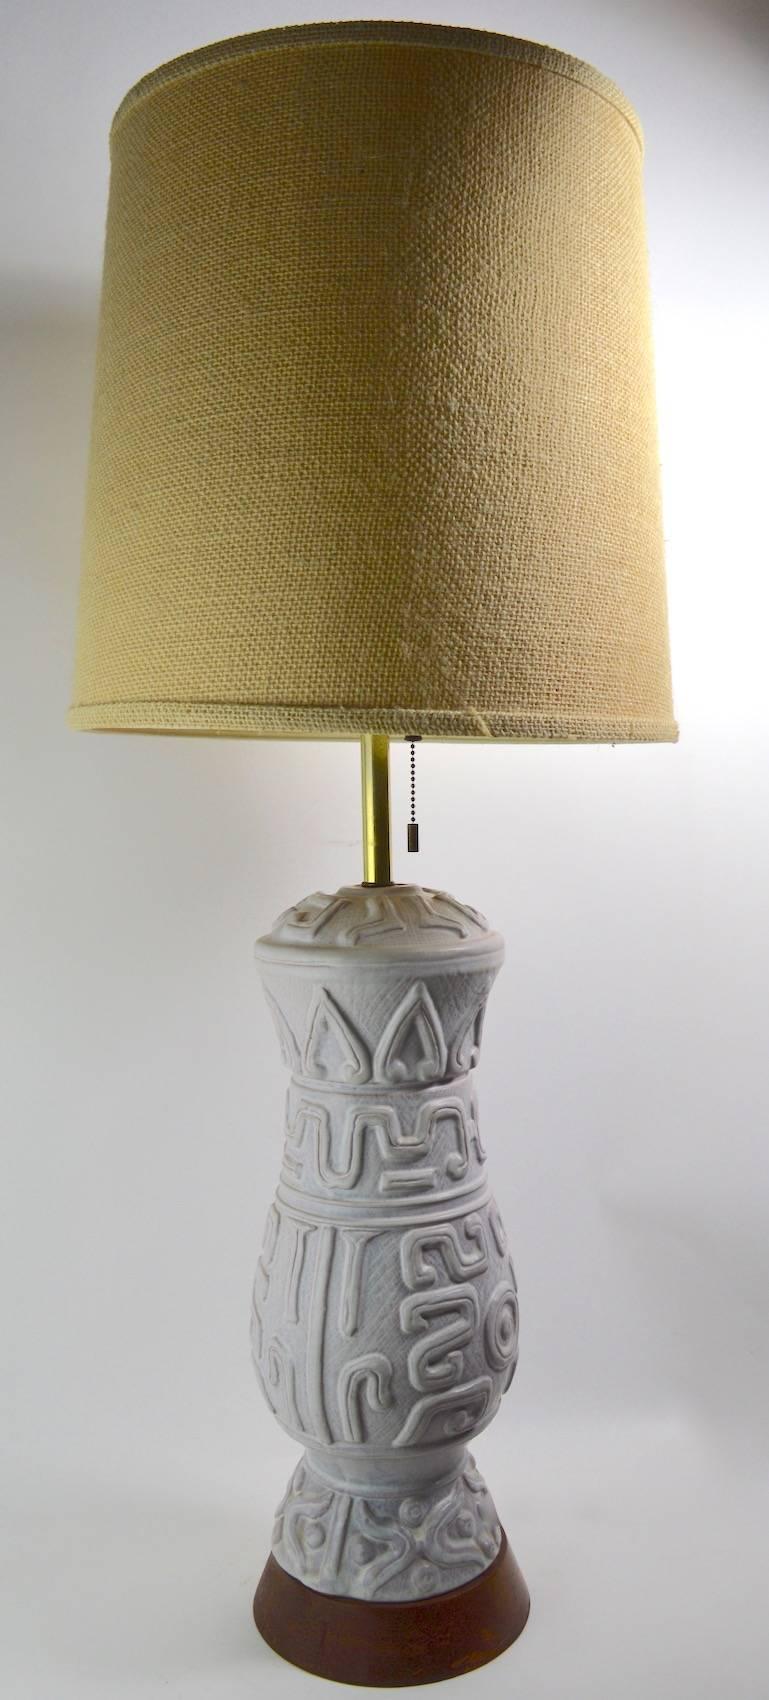 Very stylish and sophisticated pair of ceramic lamps, designed by Gerald Thurston, for Lightolier. The ceramic body has an Aztec influence motif, each mounted on a solid wood plinth base (finish on base shows wear). Both have three sockets, which